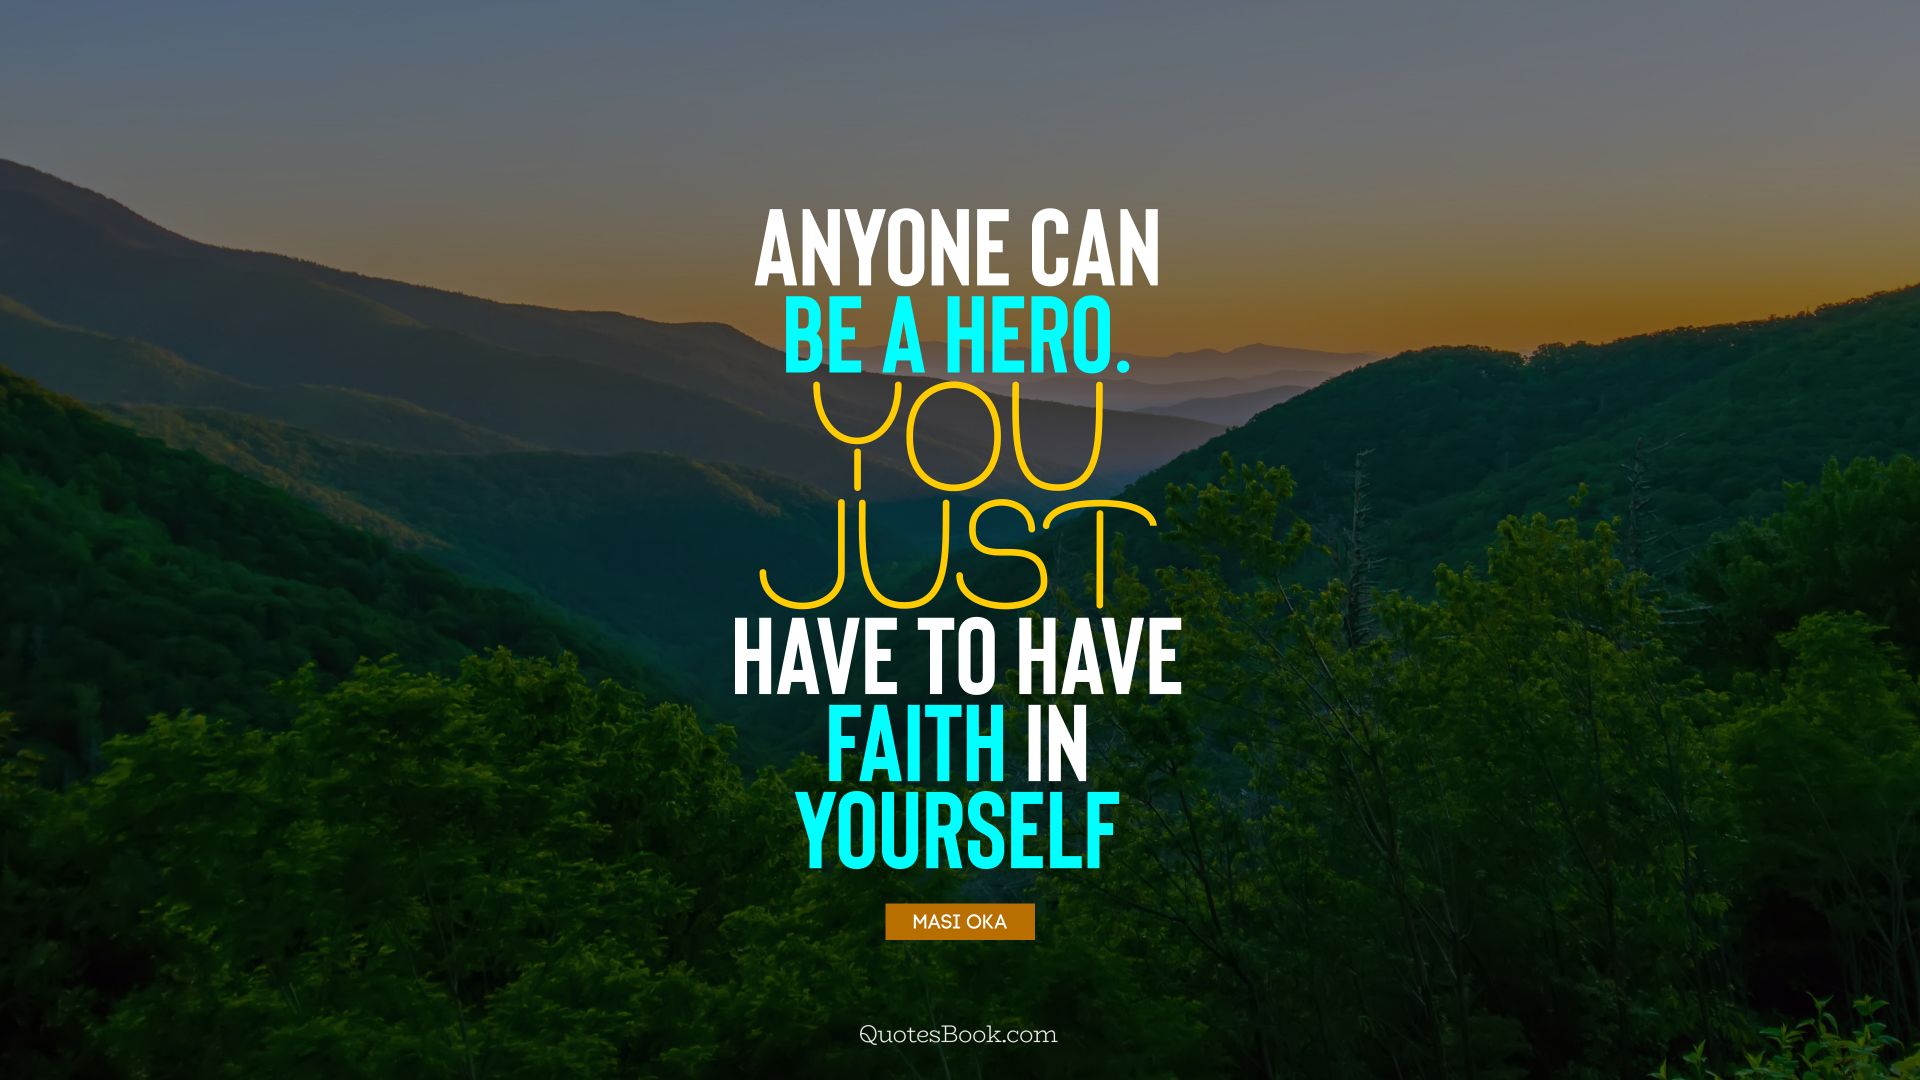 Anyone can be a hero. You just have to have faith in yourself. - Quote by Masi Oka